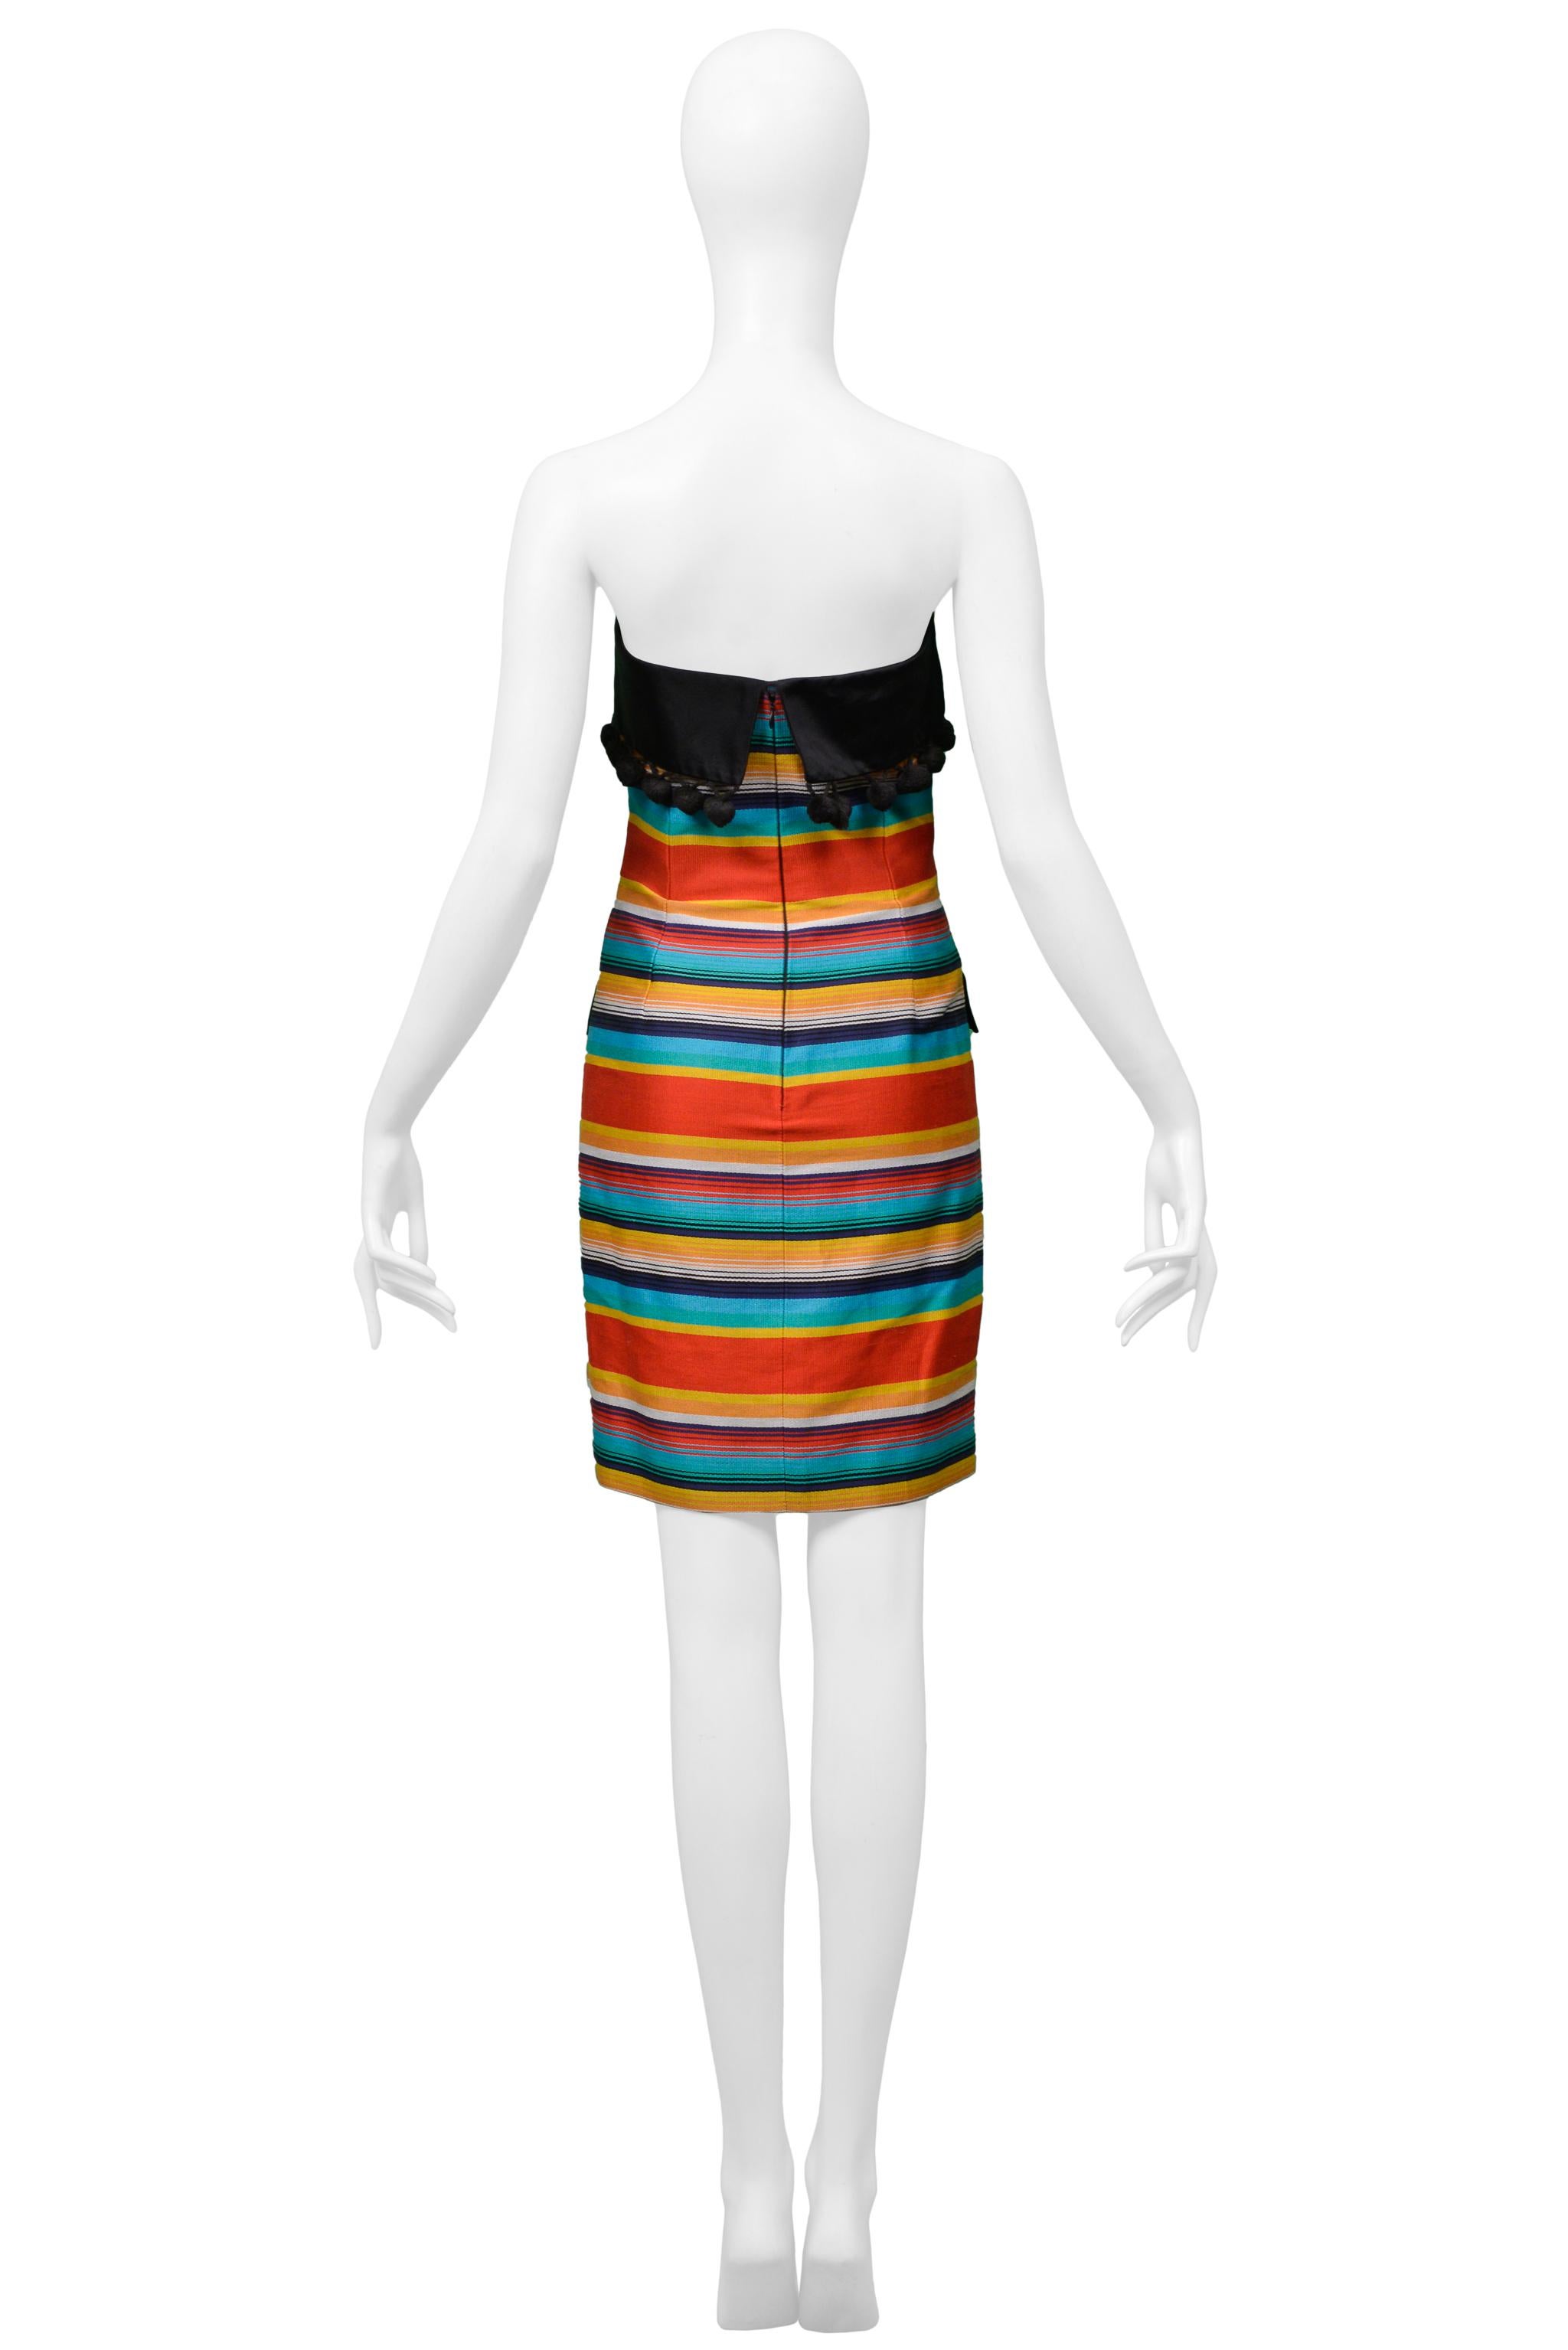 Perry Ellis By Marc Jacobs Striped Strapless Dress 1992 For Sale 1